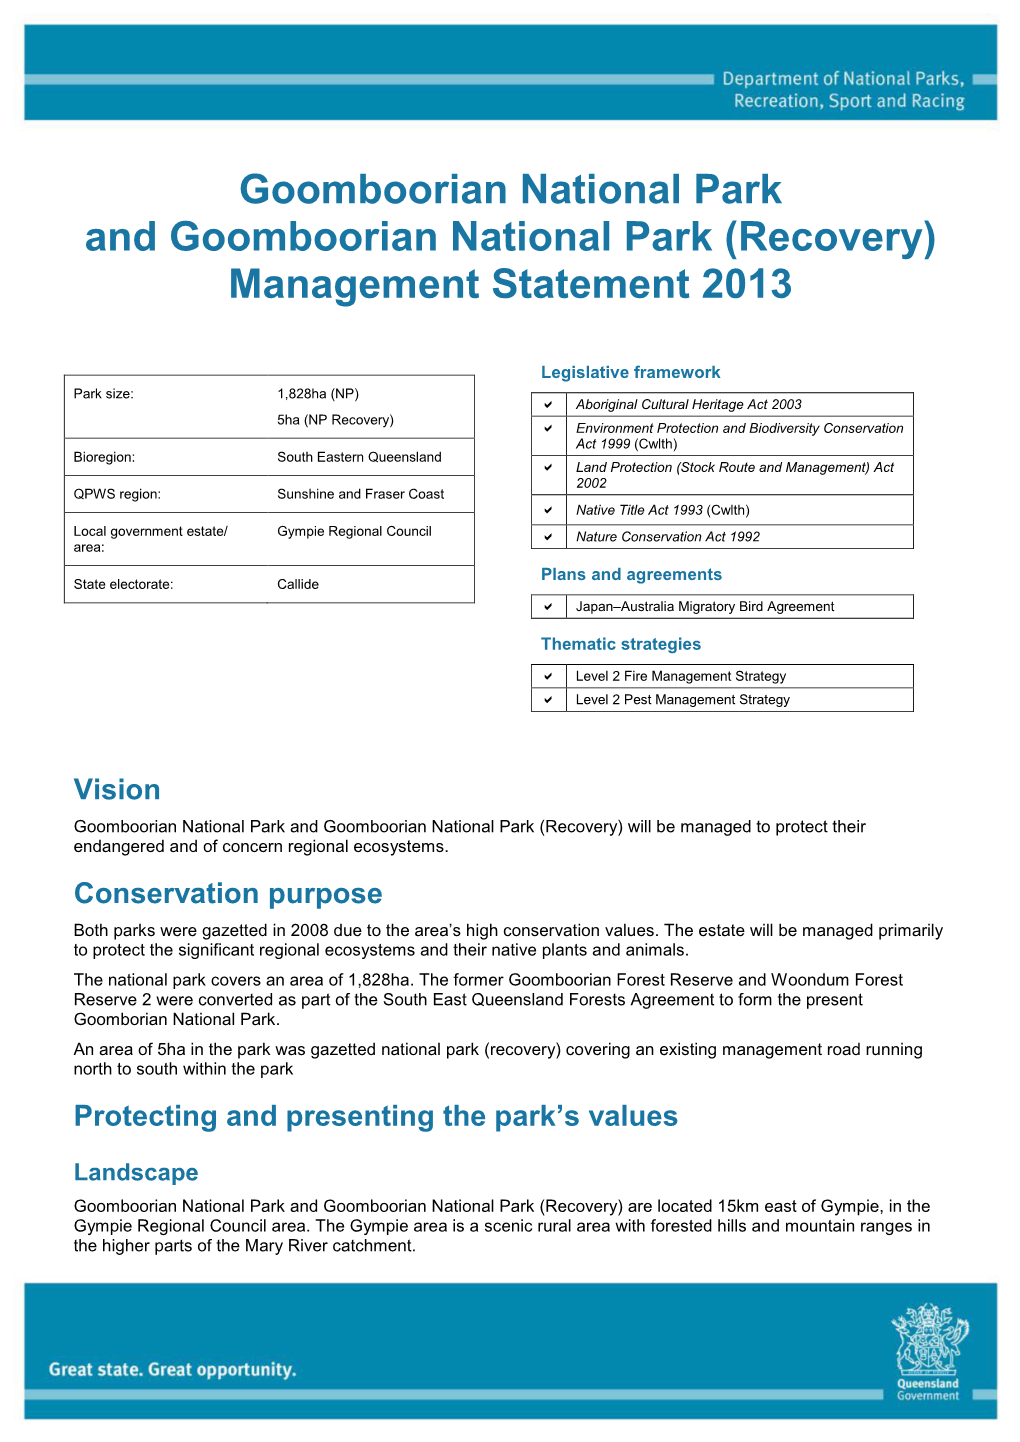 Goomboorian National Park and Goomboorian National Park (Recovery) Management Statement 2013